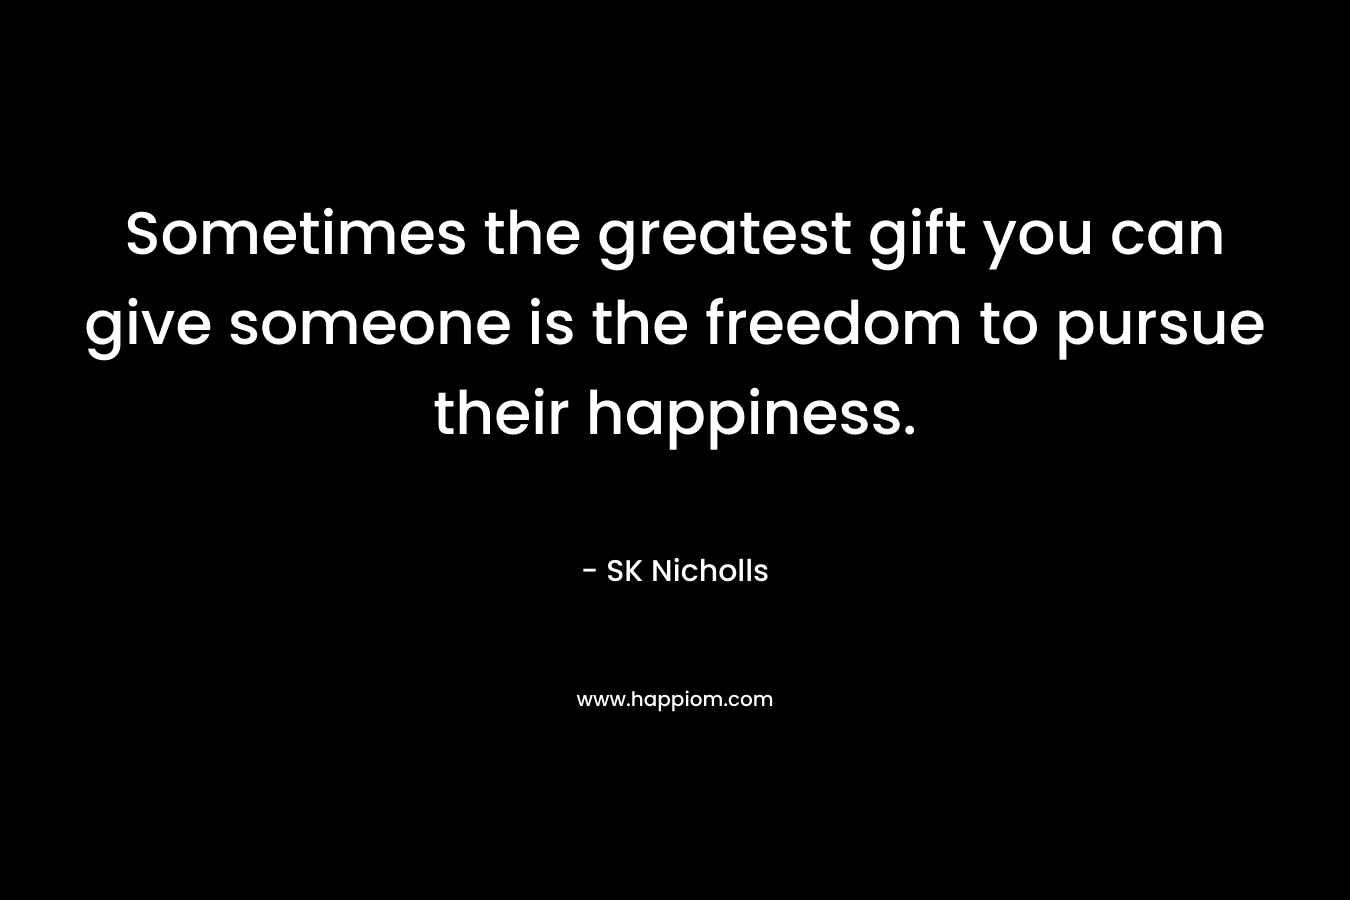 Sometimes the greatest gift you can give someone is the freedom to pursue their happiness. – SK Nicholls